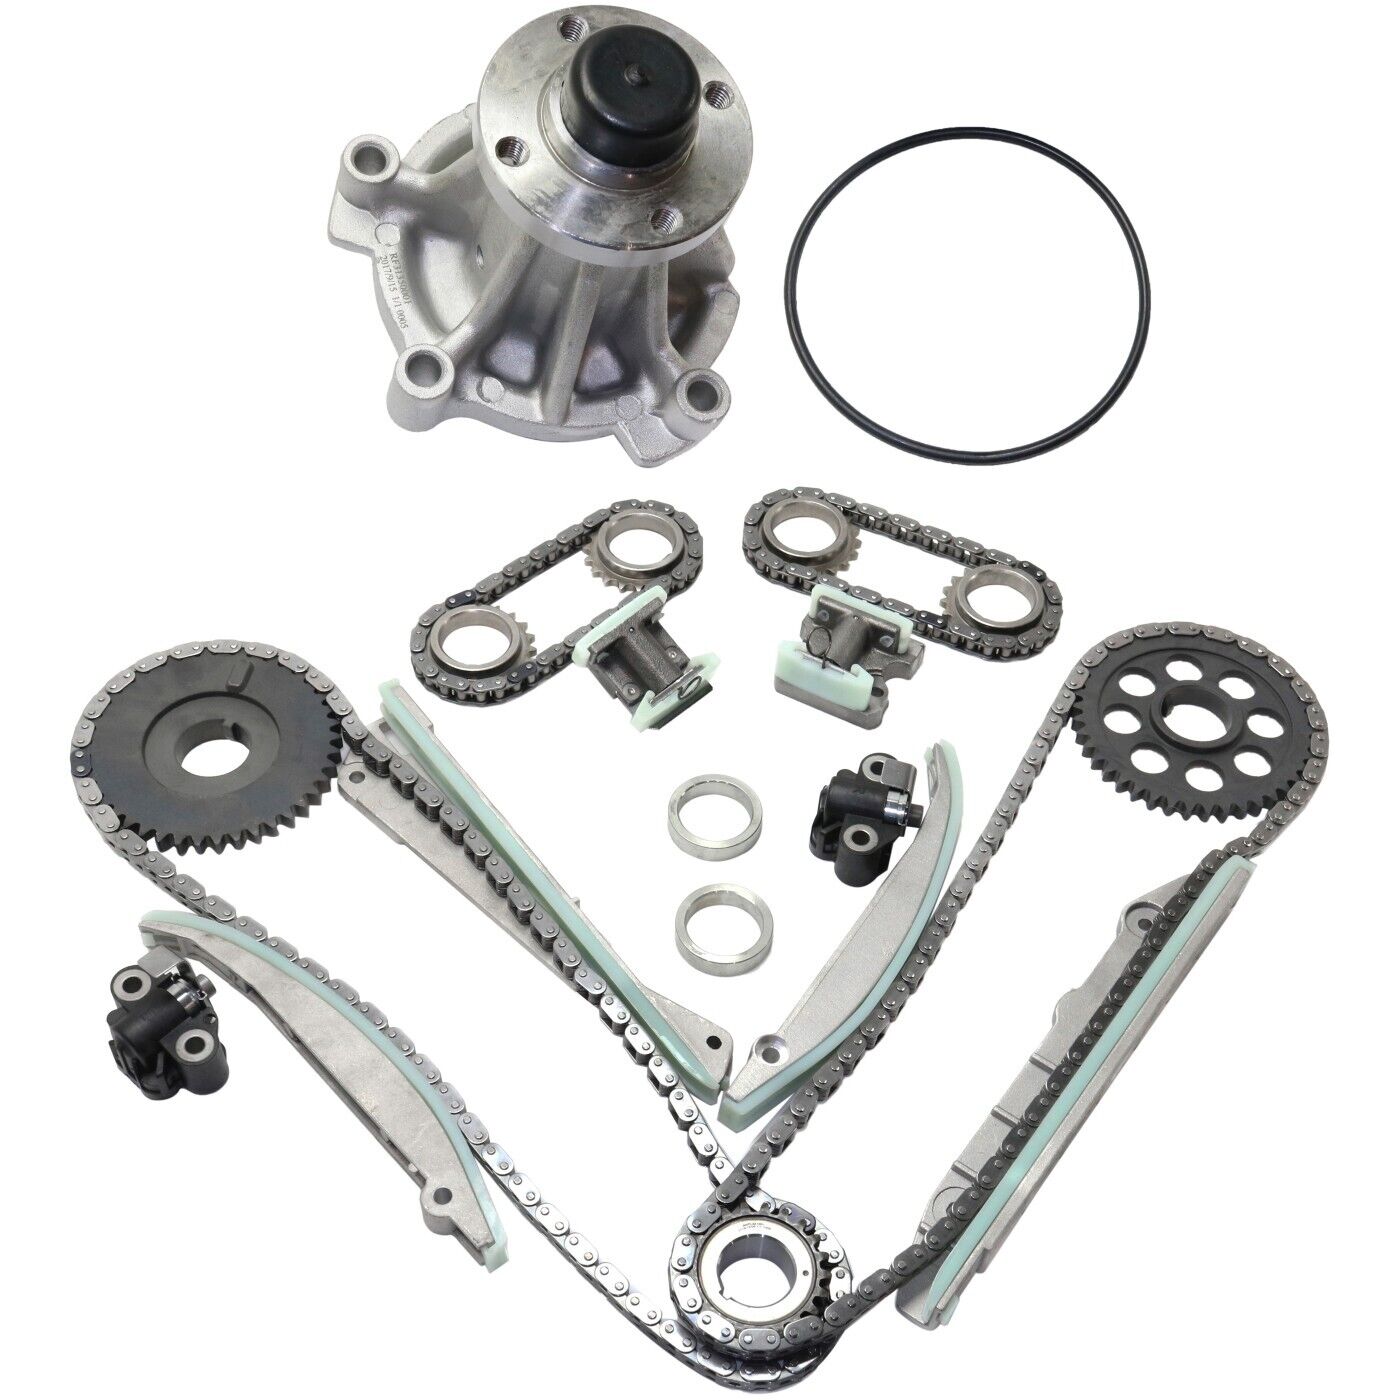 Timing Chain Kit For 2003-2005 Lincoln Aviator Includes Water Pump